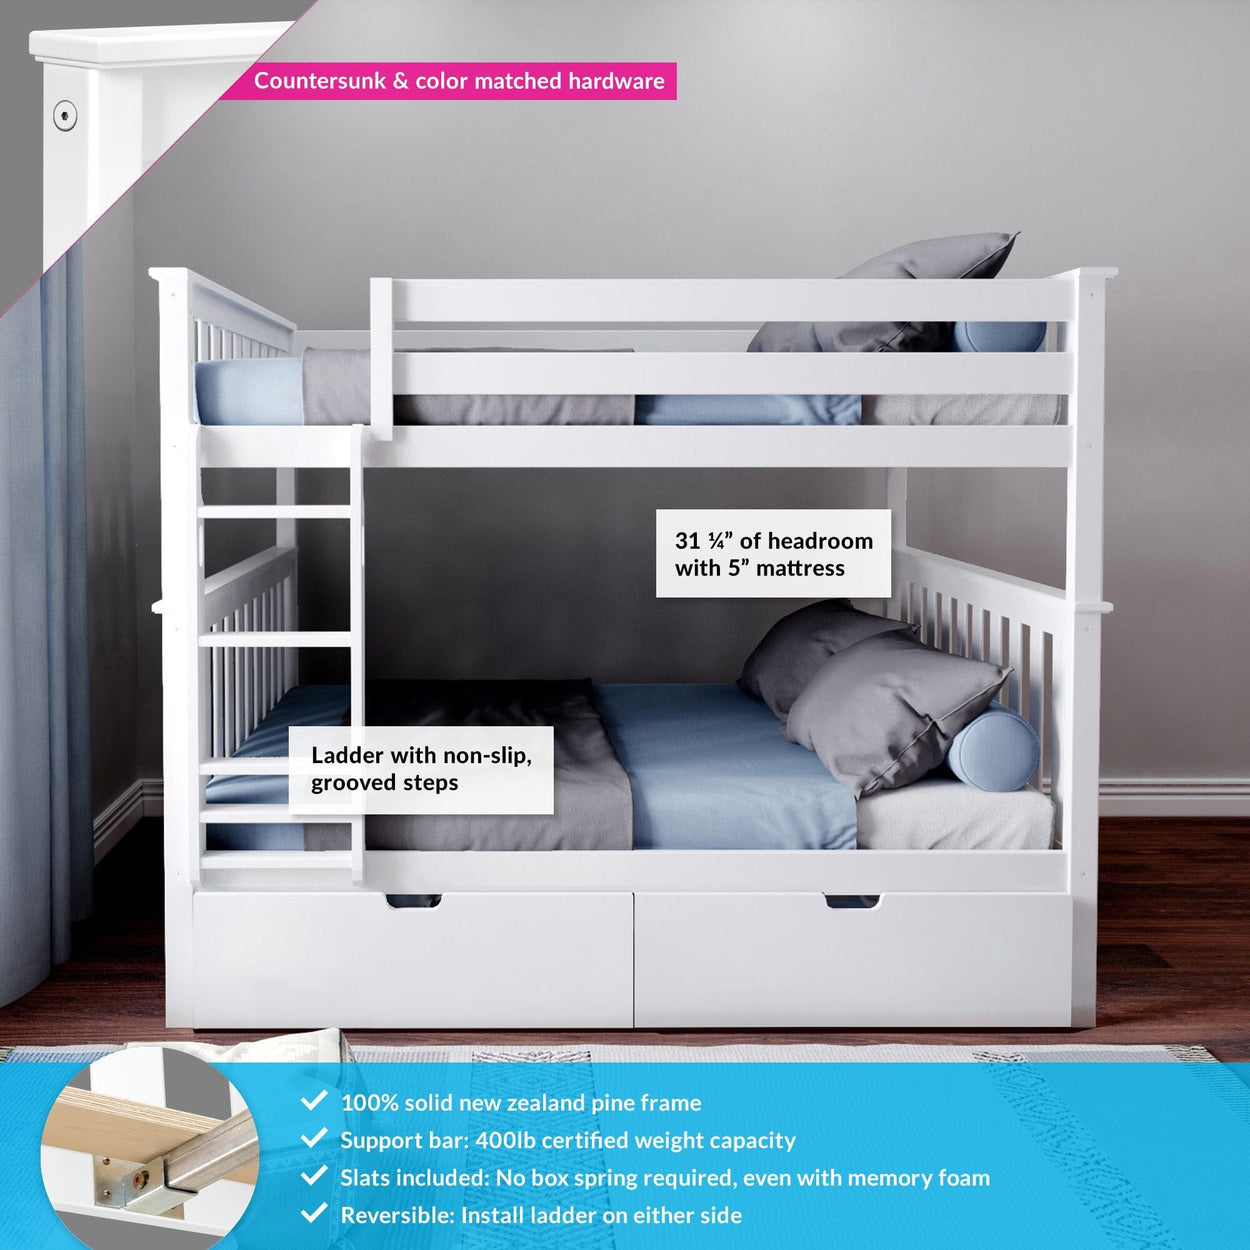 187251-002 : Bunk Beds Full Over Full Bunk Bed With Storage Drawers, White